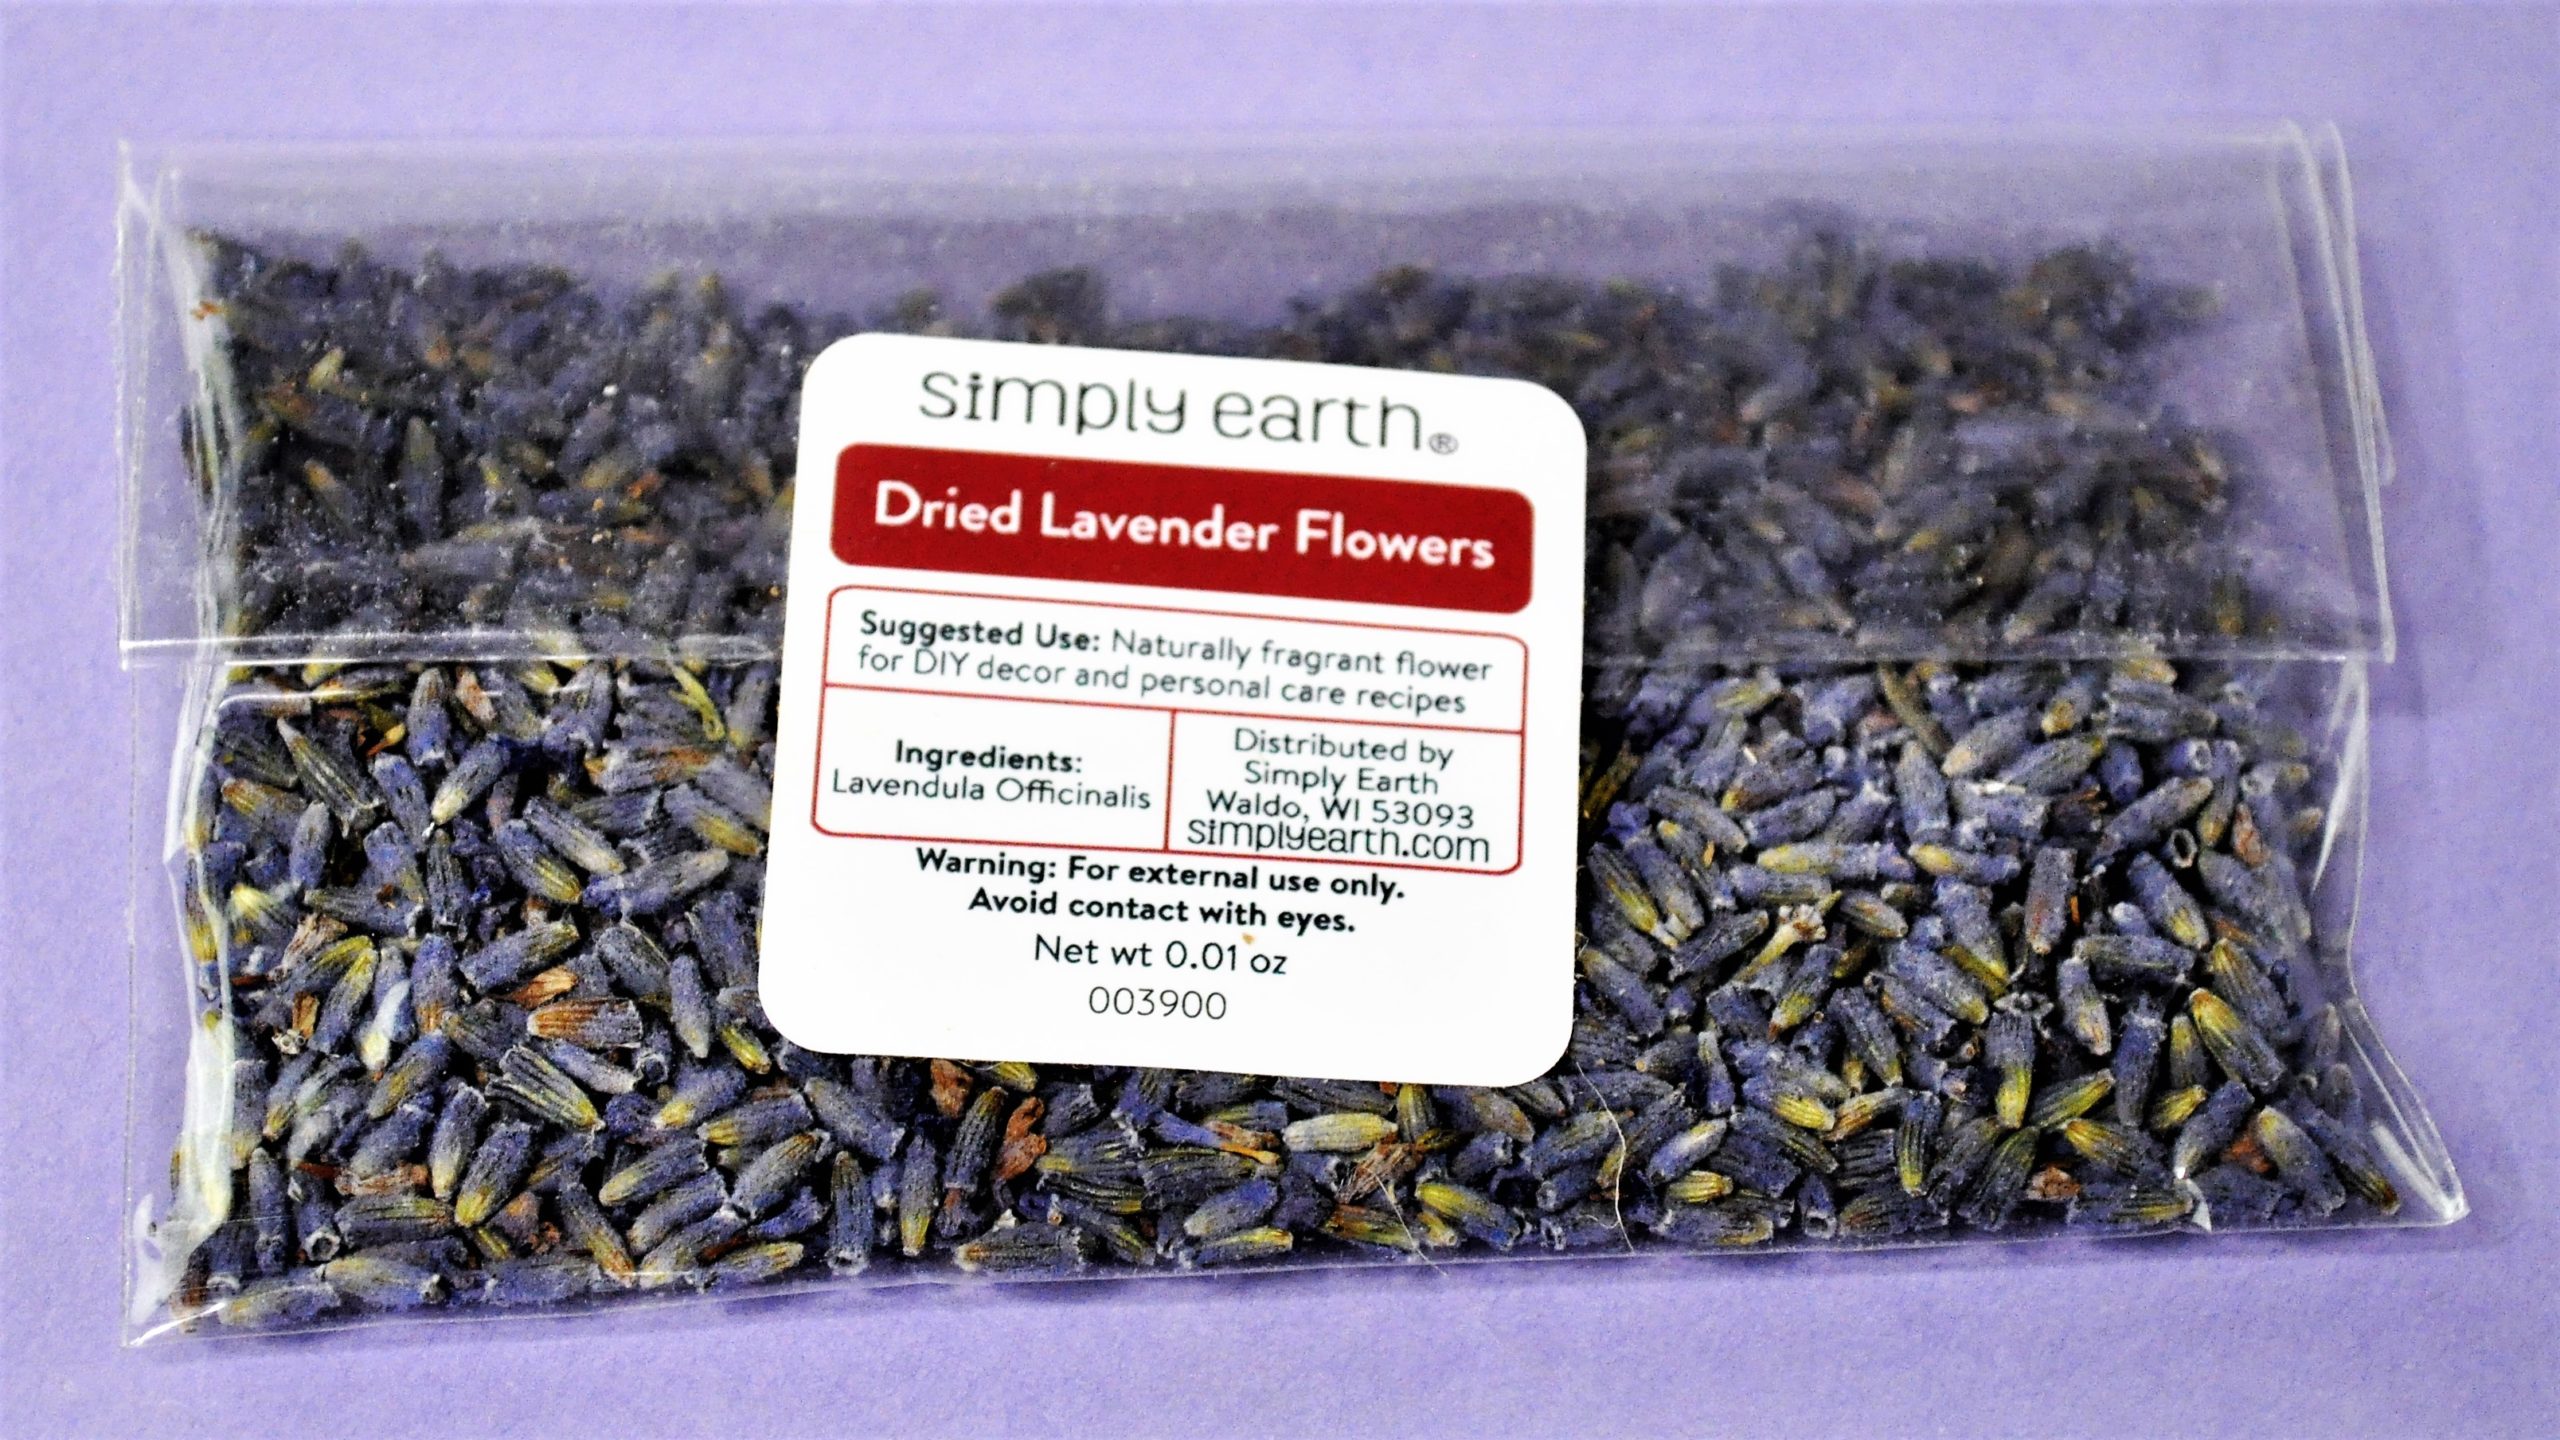 Simply Earth November 2021 Dried Lavender Flowers